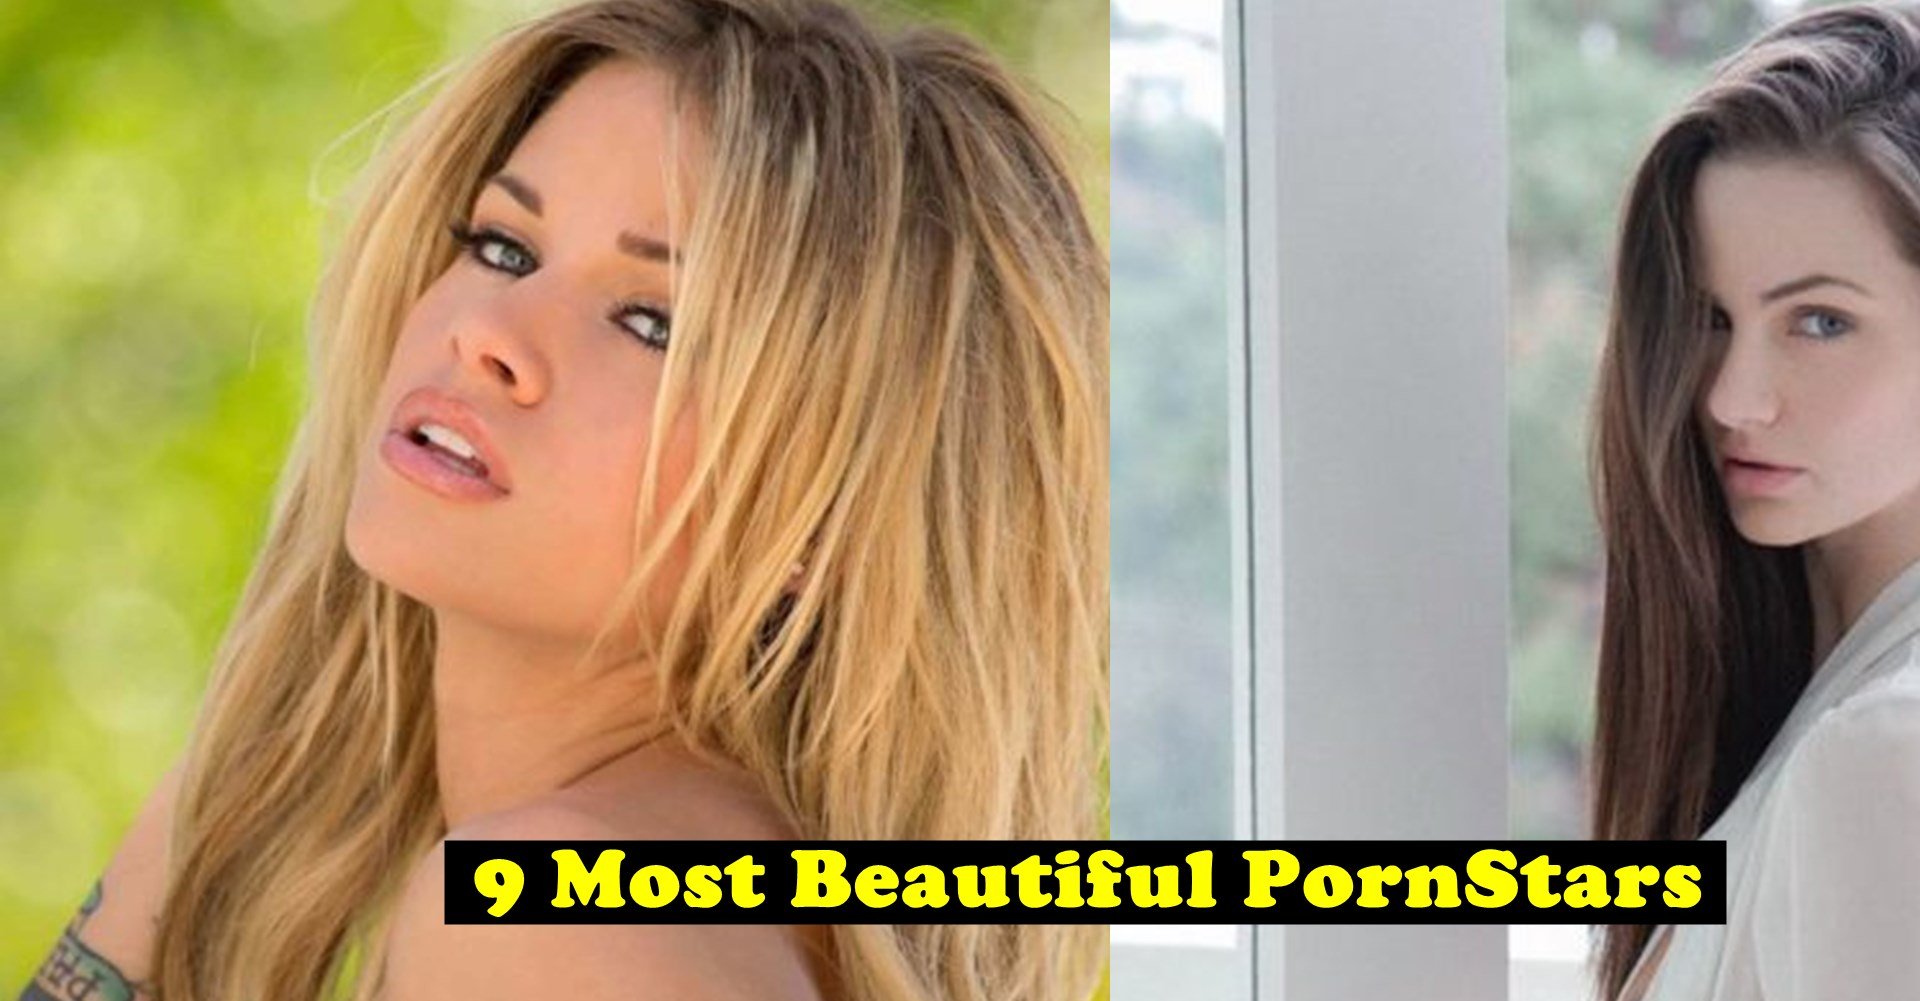 best of The pornstar most beautiful world in